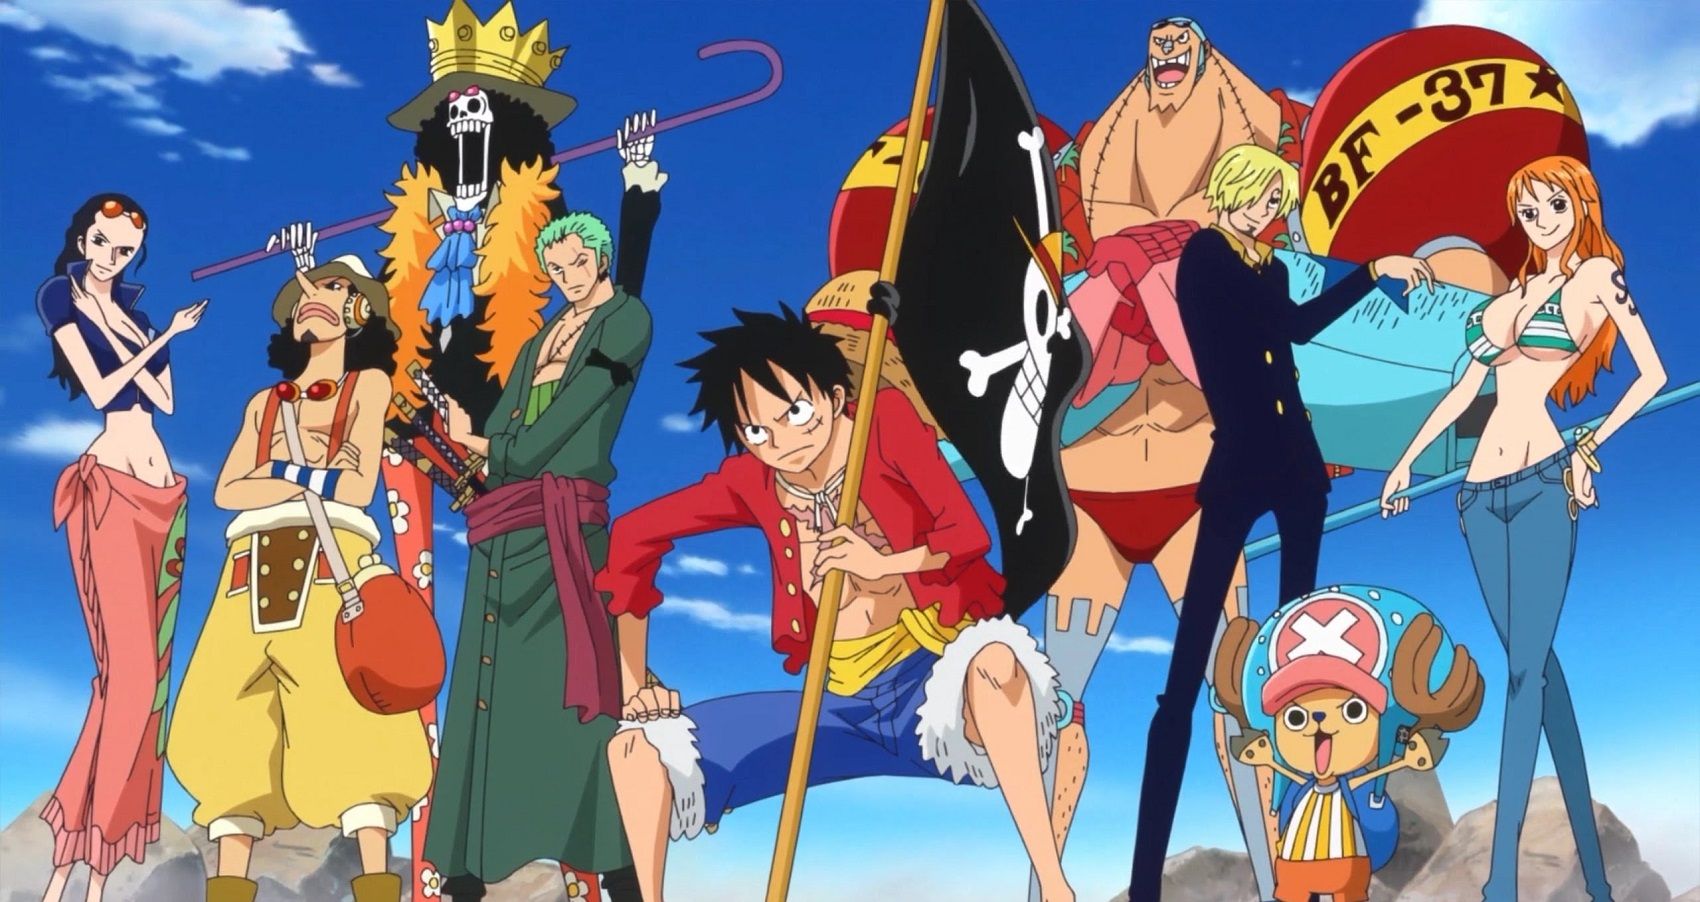 Straw Hat Pirates Members In Order Every Straw Hat Pirate, Ranked According to Strength